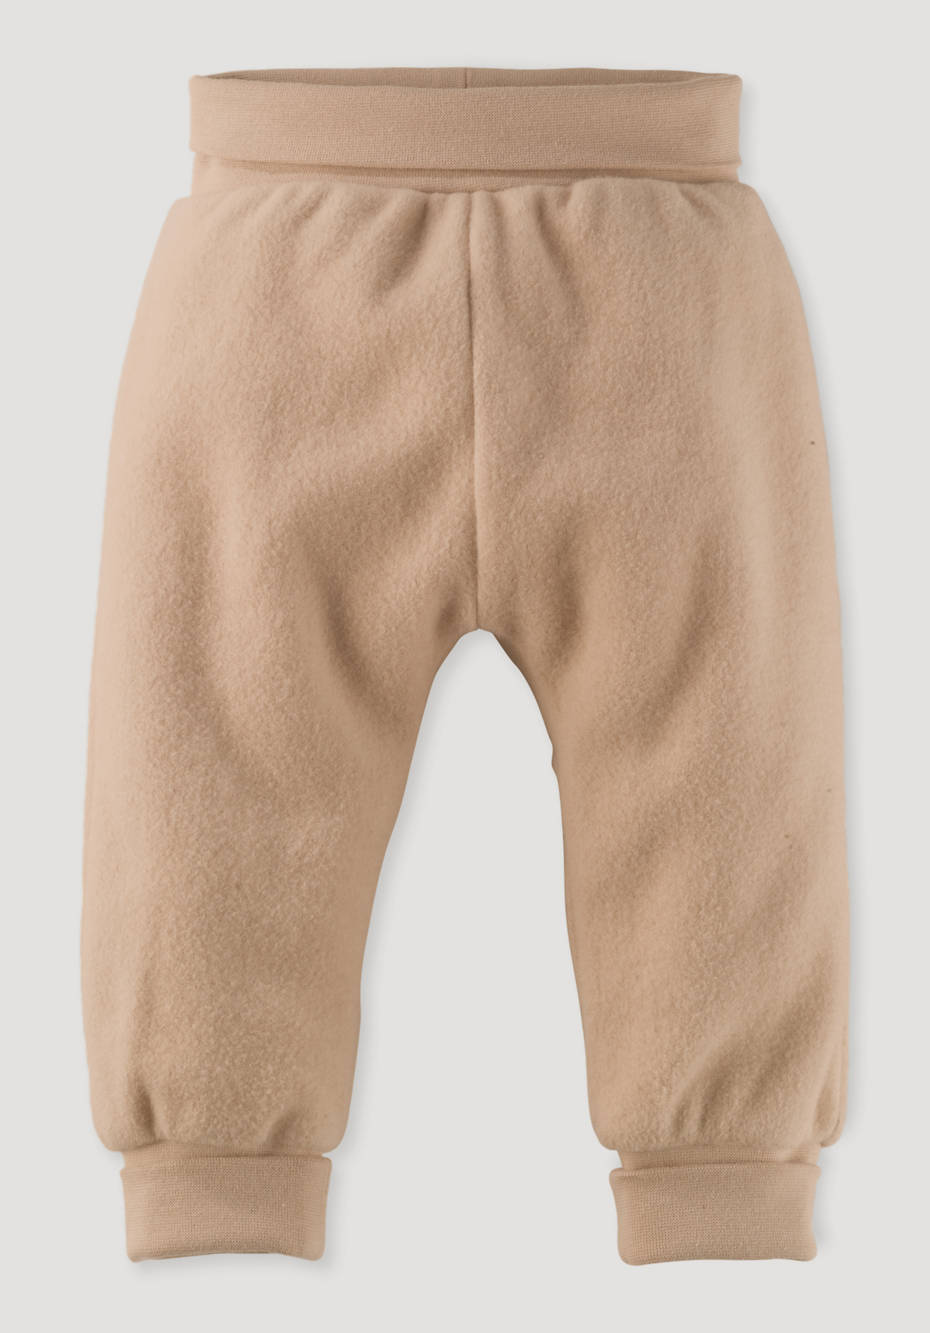 Soft fleece trousers made from pure organic cotton